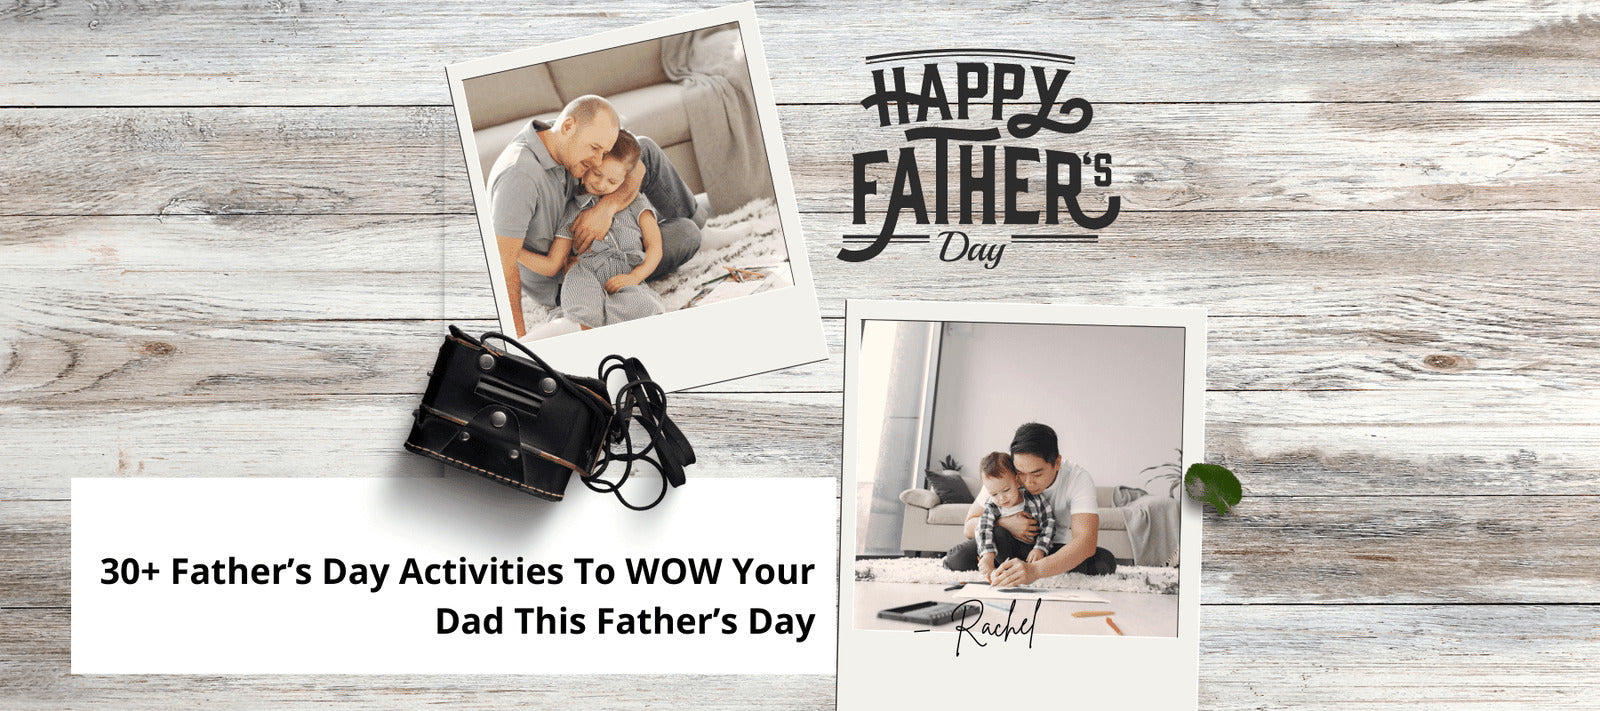 60+ Father’s Day Activities To WOW Your Dad This Father’s Day